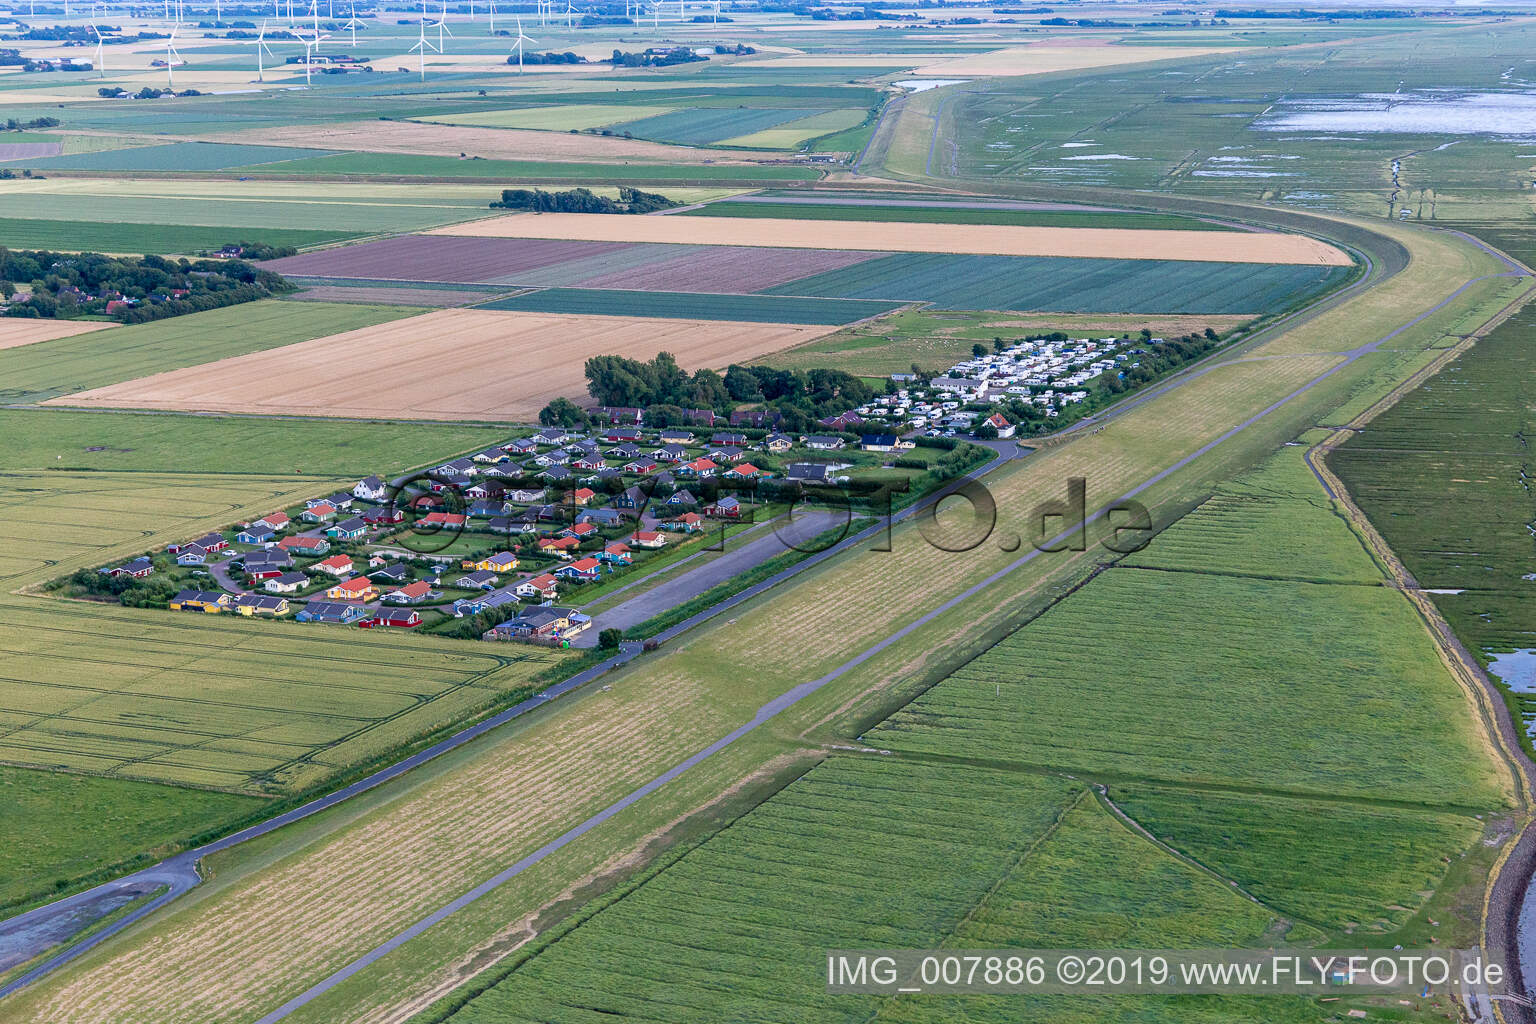 Aerial view of Holiday home development and camping Wesselburenerkoog in Wesselburenerkoog in the state Schleswig Holstein, Germany